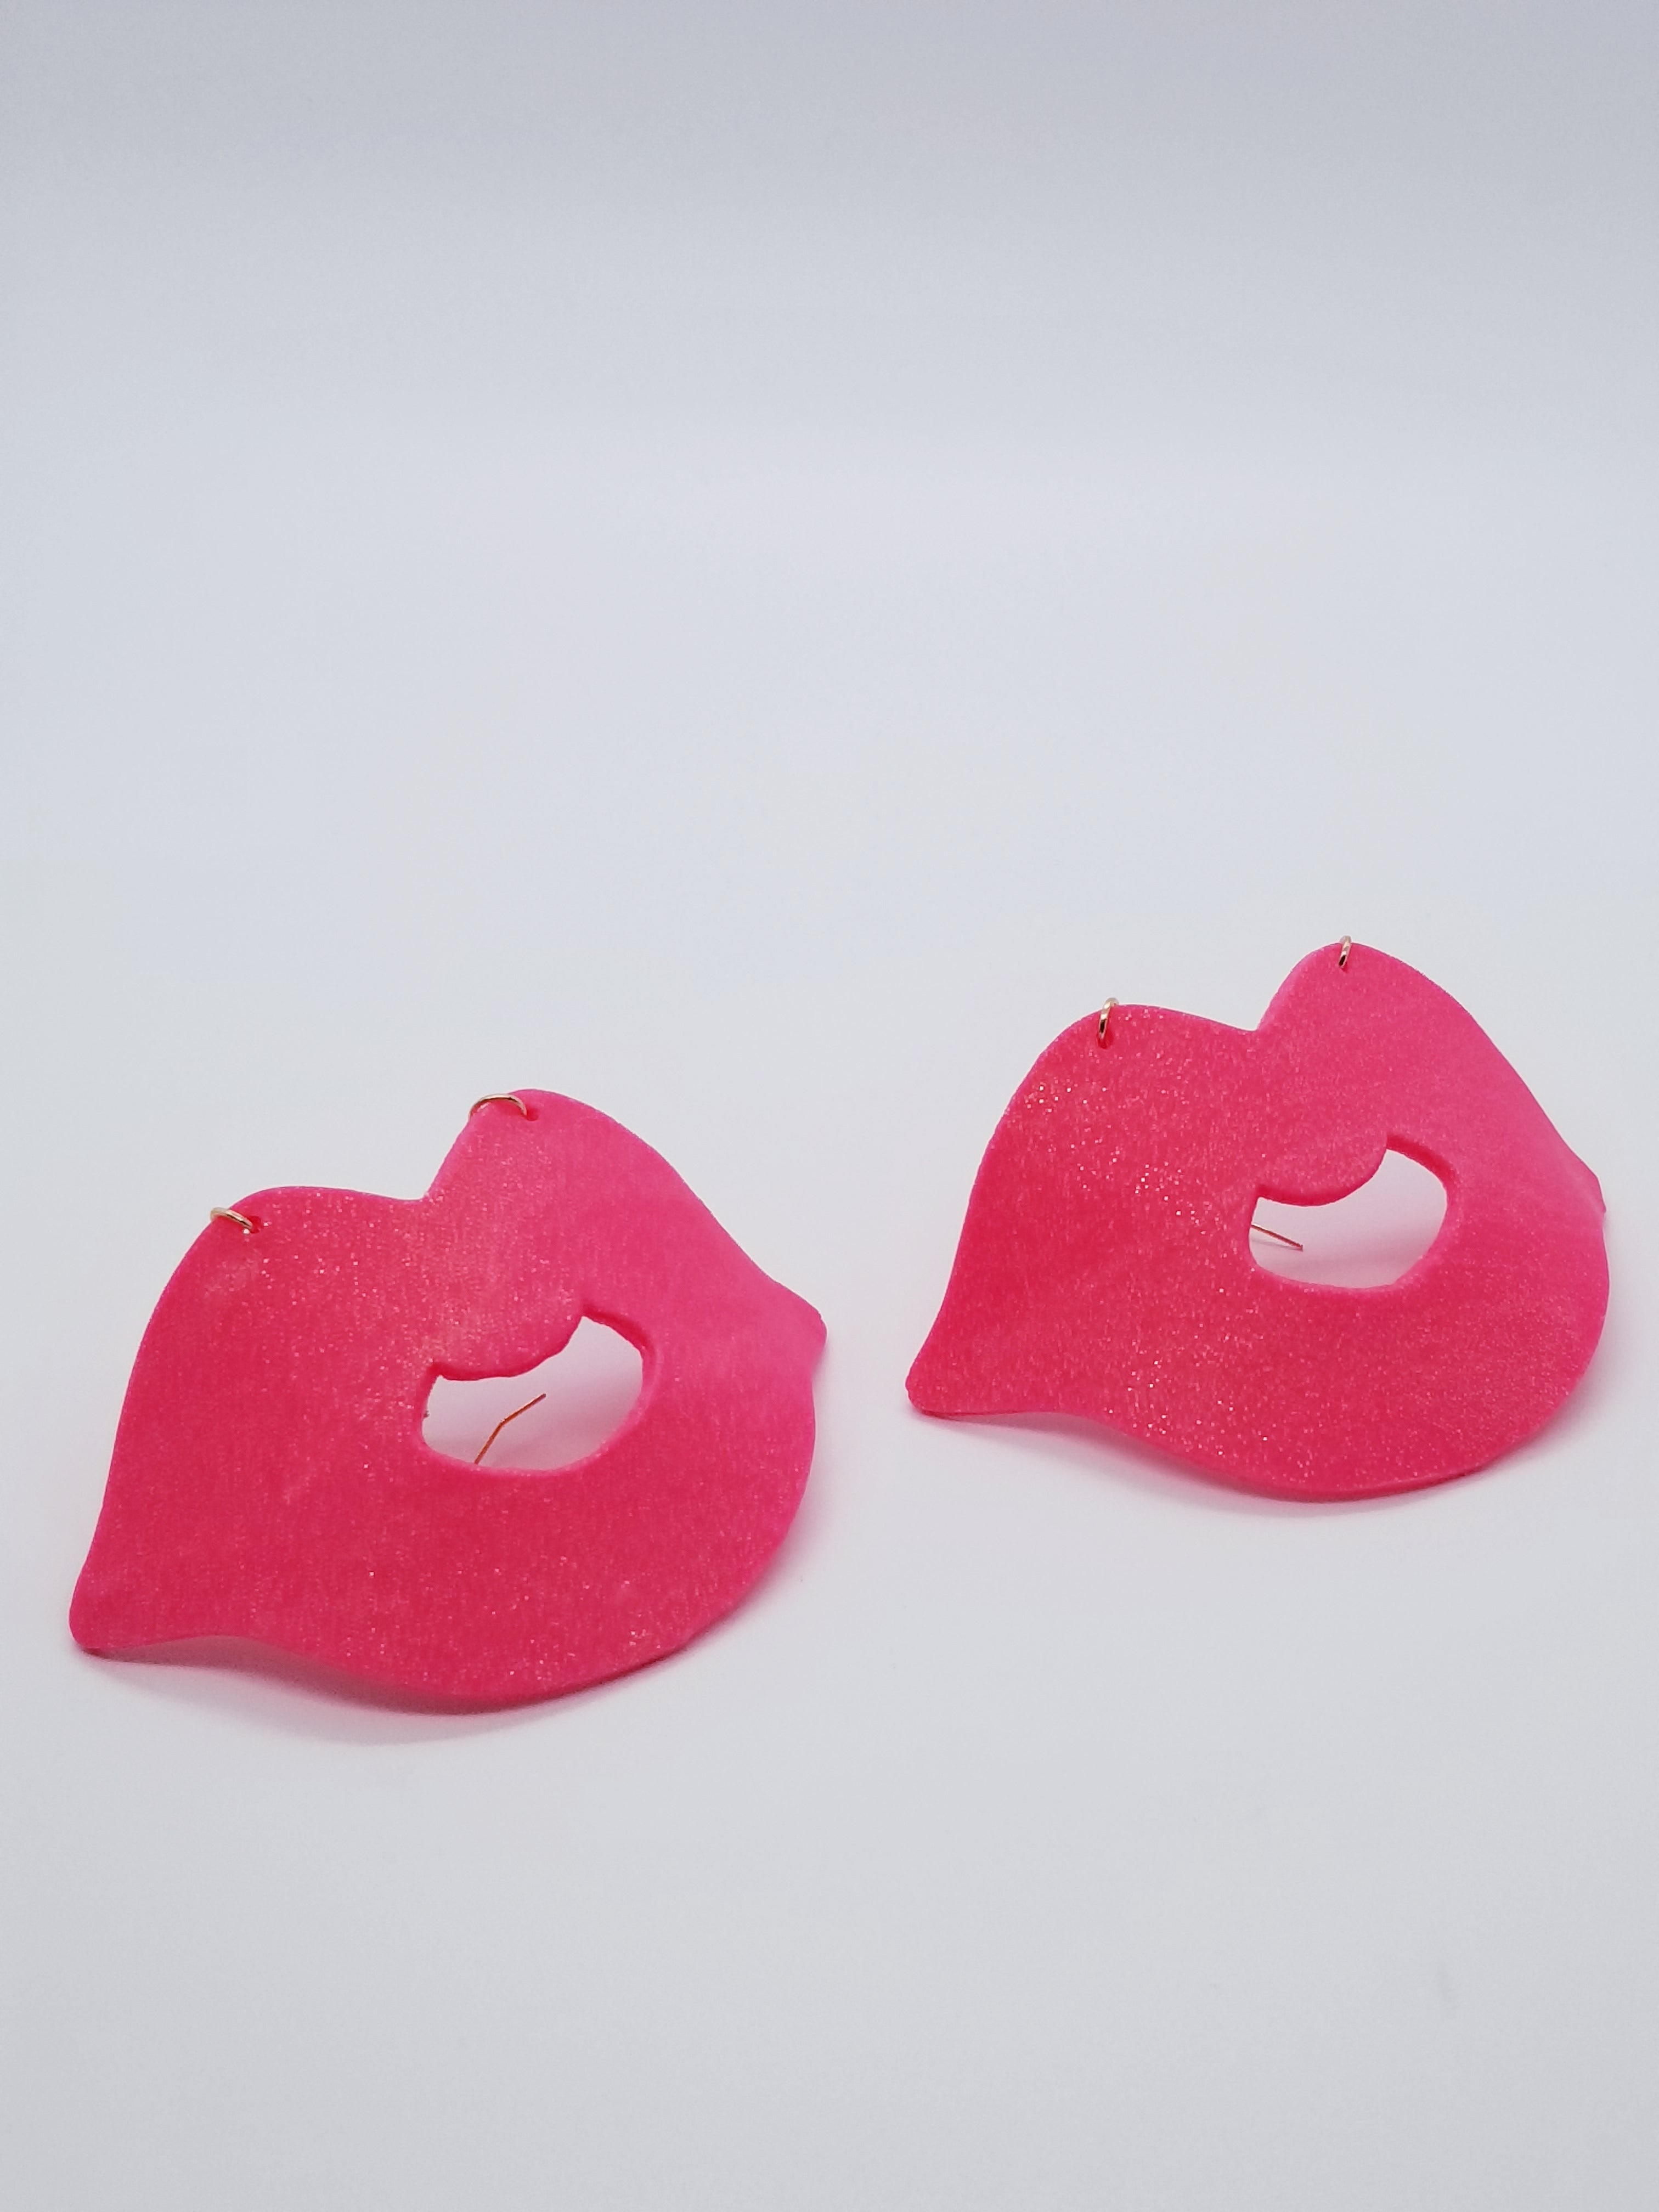 Length: 4 inches | Weight: 0.8 ounces   Designed just for you! The earrings are handmade using hot pink polymer clay lip shaped design, gold chains, gold jump rings, and hypoallergenic hooks with back closures. 